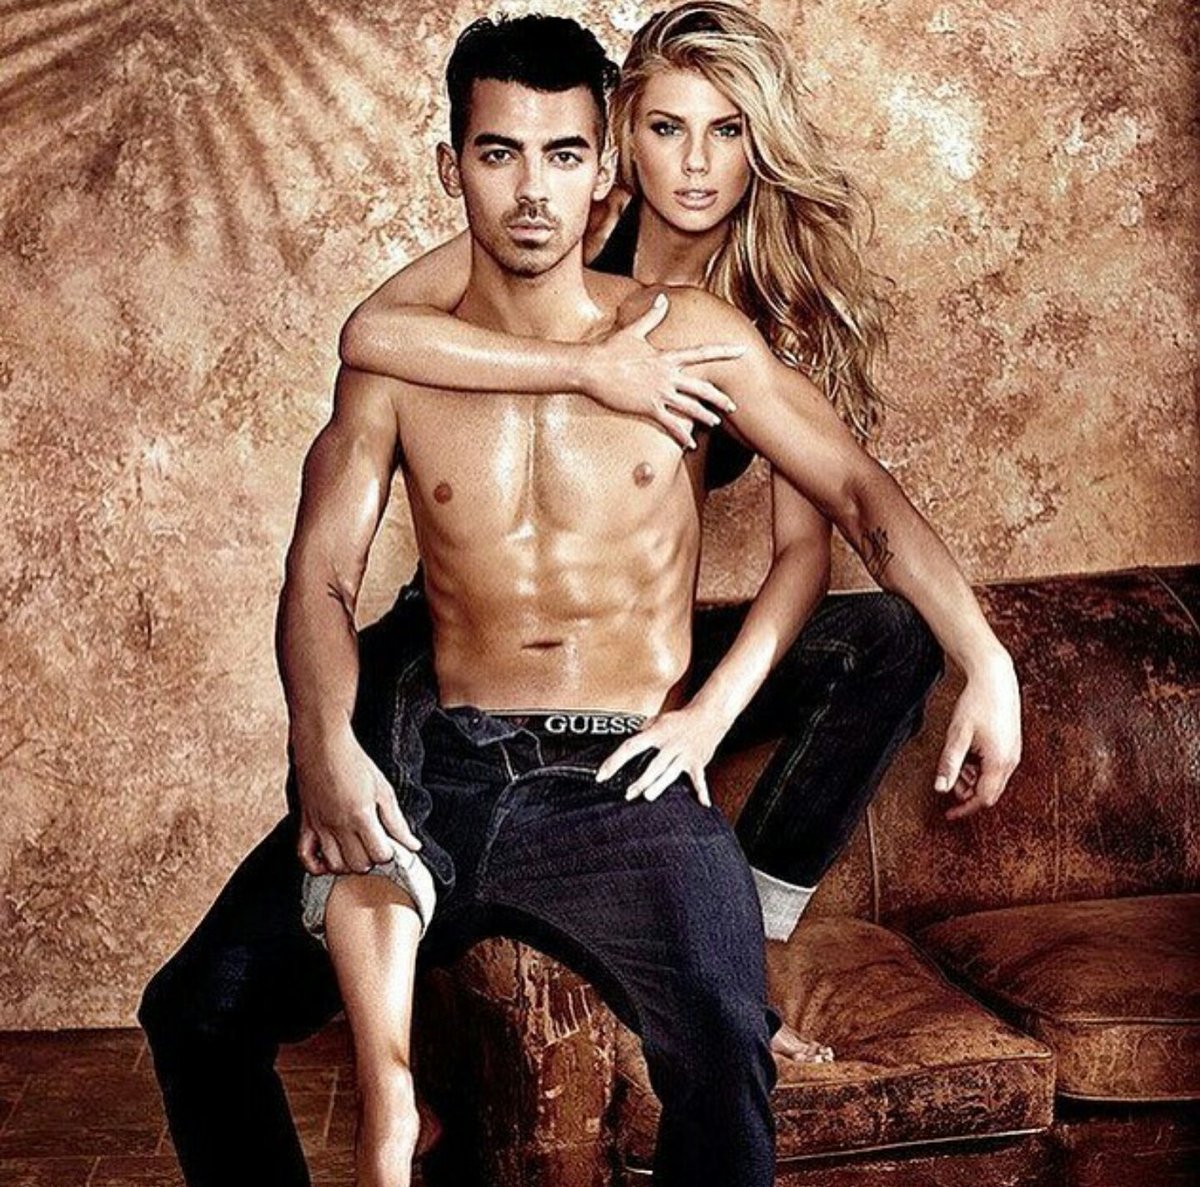 Not mad at an oiled up @joejonas ???? for @GUESS by @yutsai @PaulMarciano ???? @fionastiles @djquintero https://t.co/3VCqwc7U3S